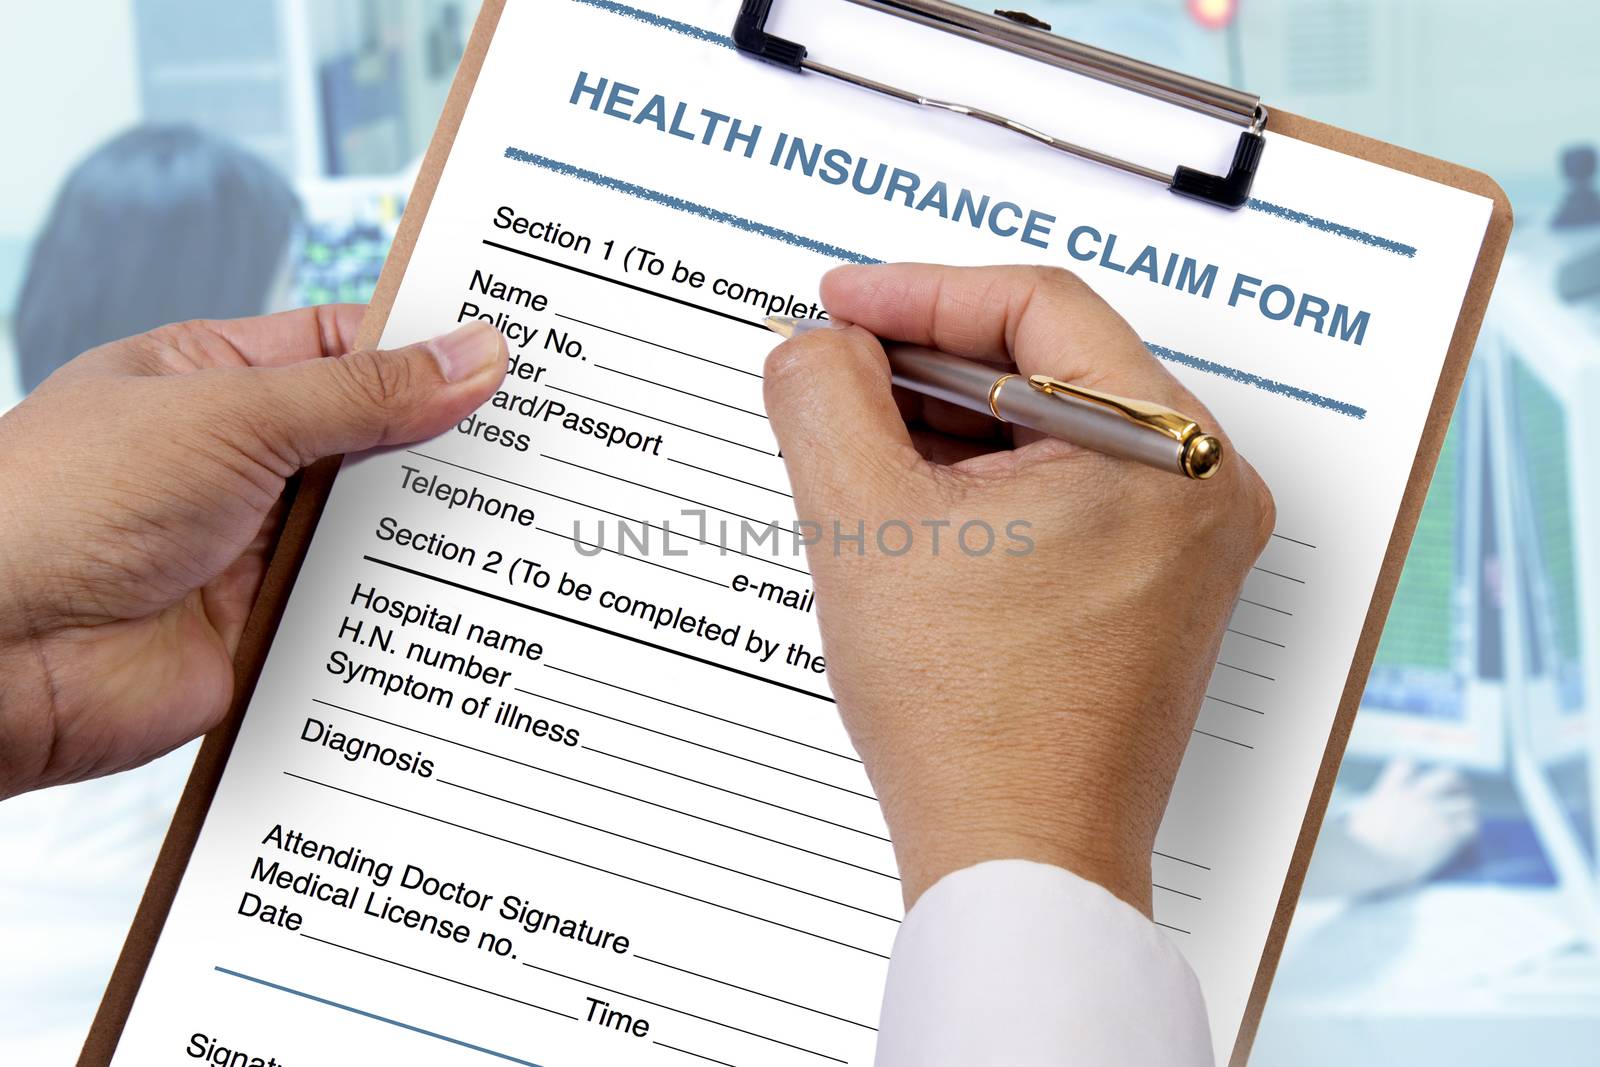 To complete blank health insurance form. by pandpstock_002